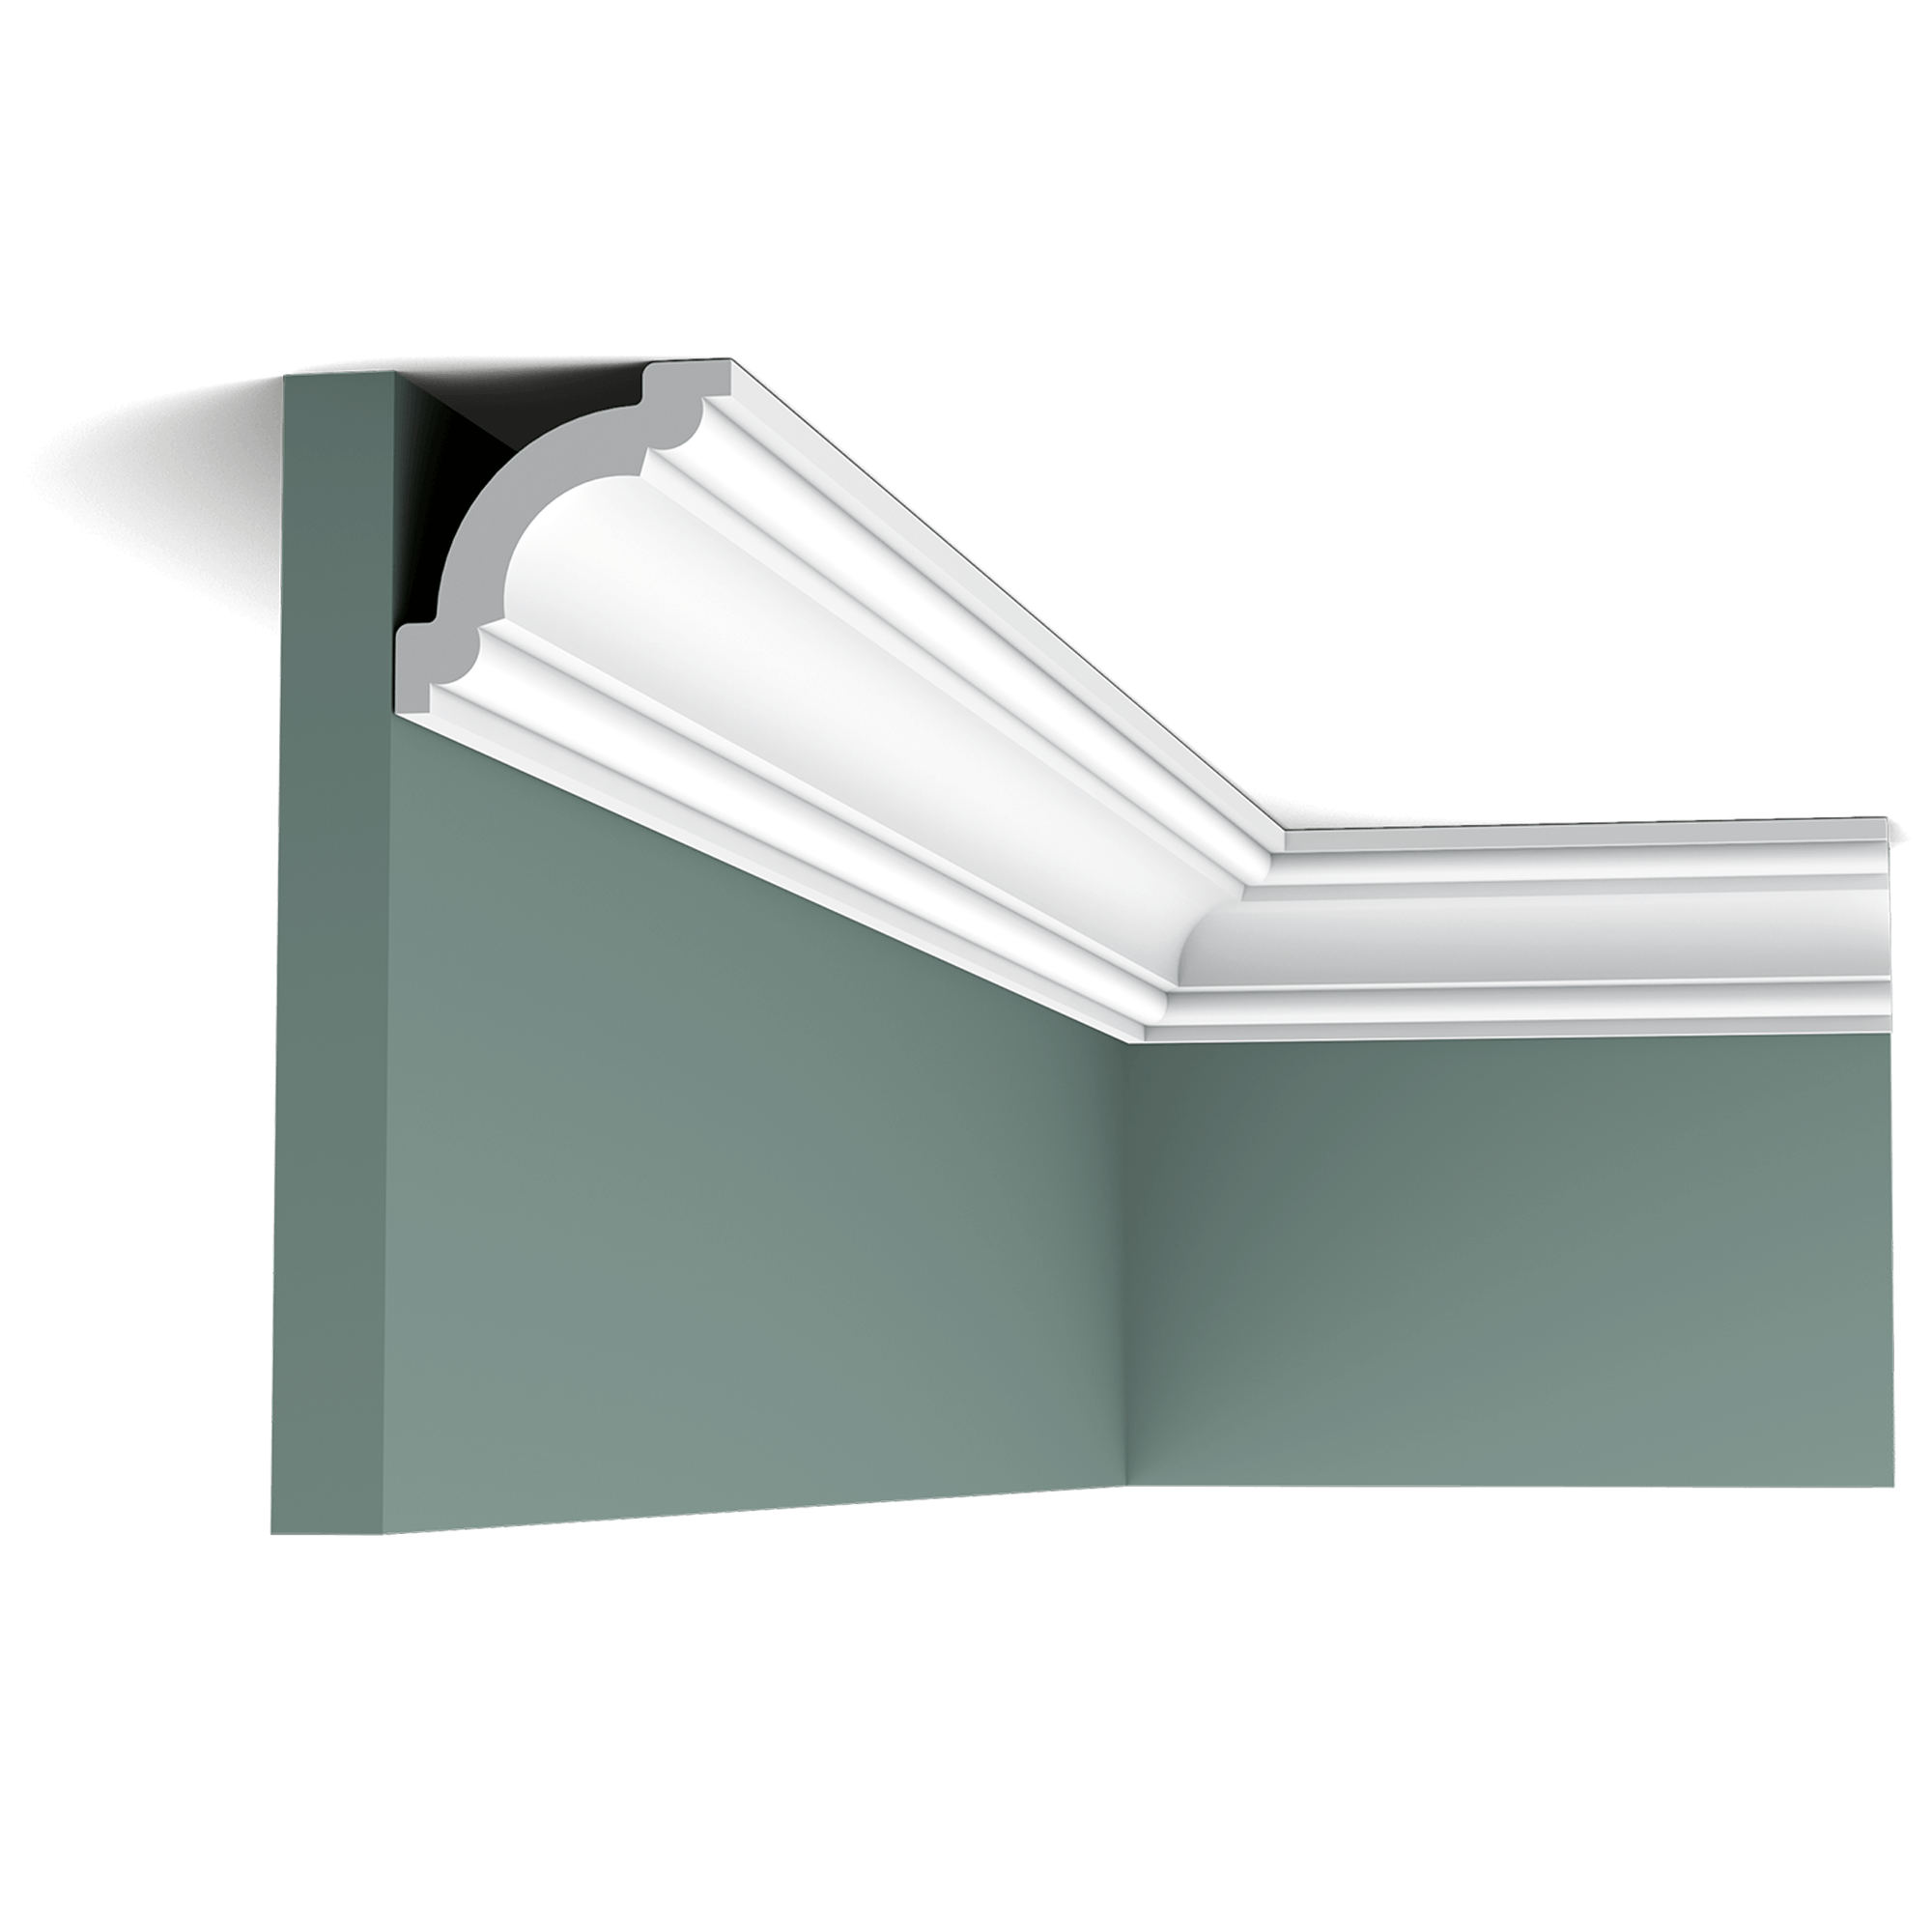 This classic cornice moulding with elegant curves creates a neat transition from wall to ceiling.